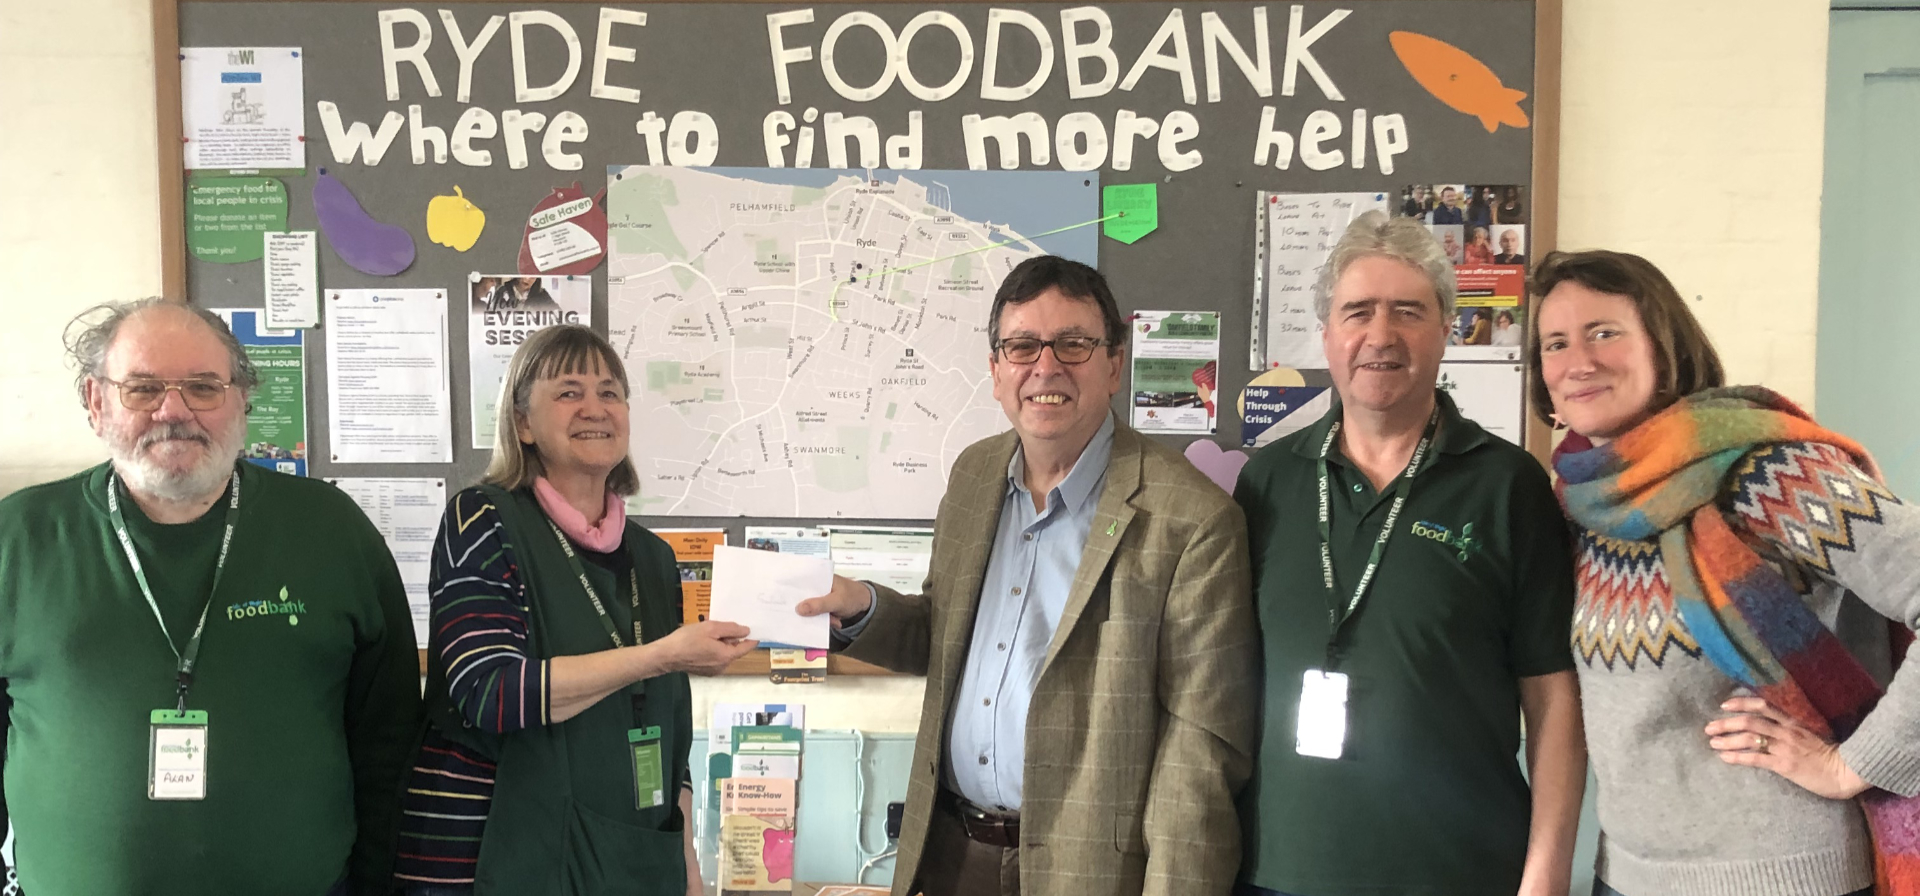 Michael presenting £370 to Ryde Foodbank to Ryde Foodbank team with Pippa Wayward, local resident in Ryde Appley and Elmfield Ward